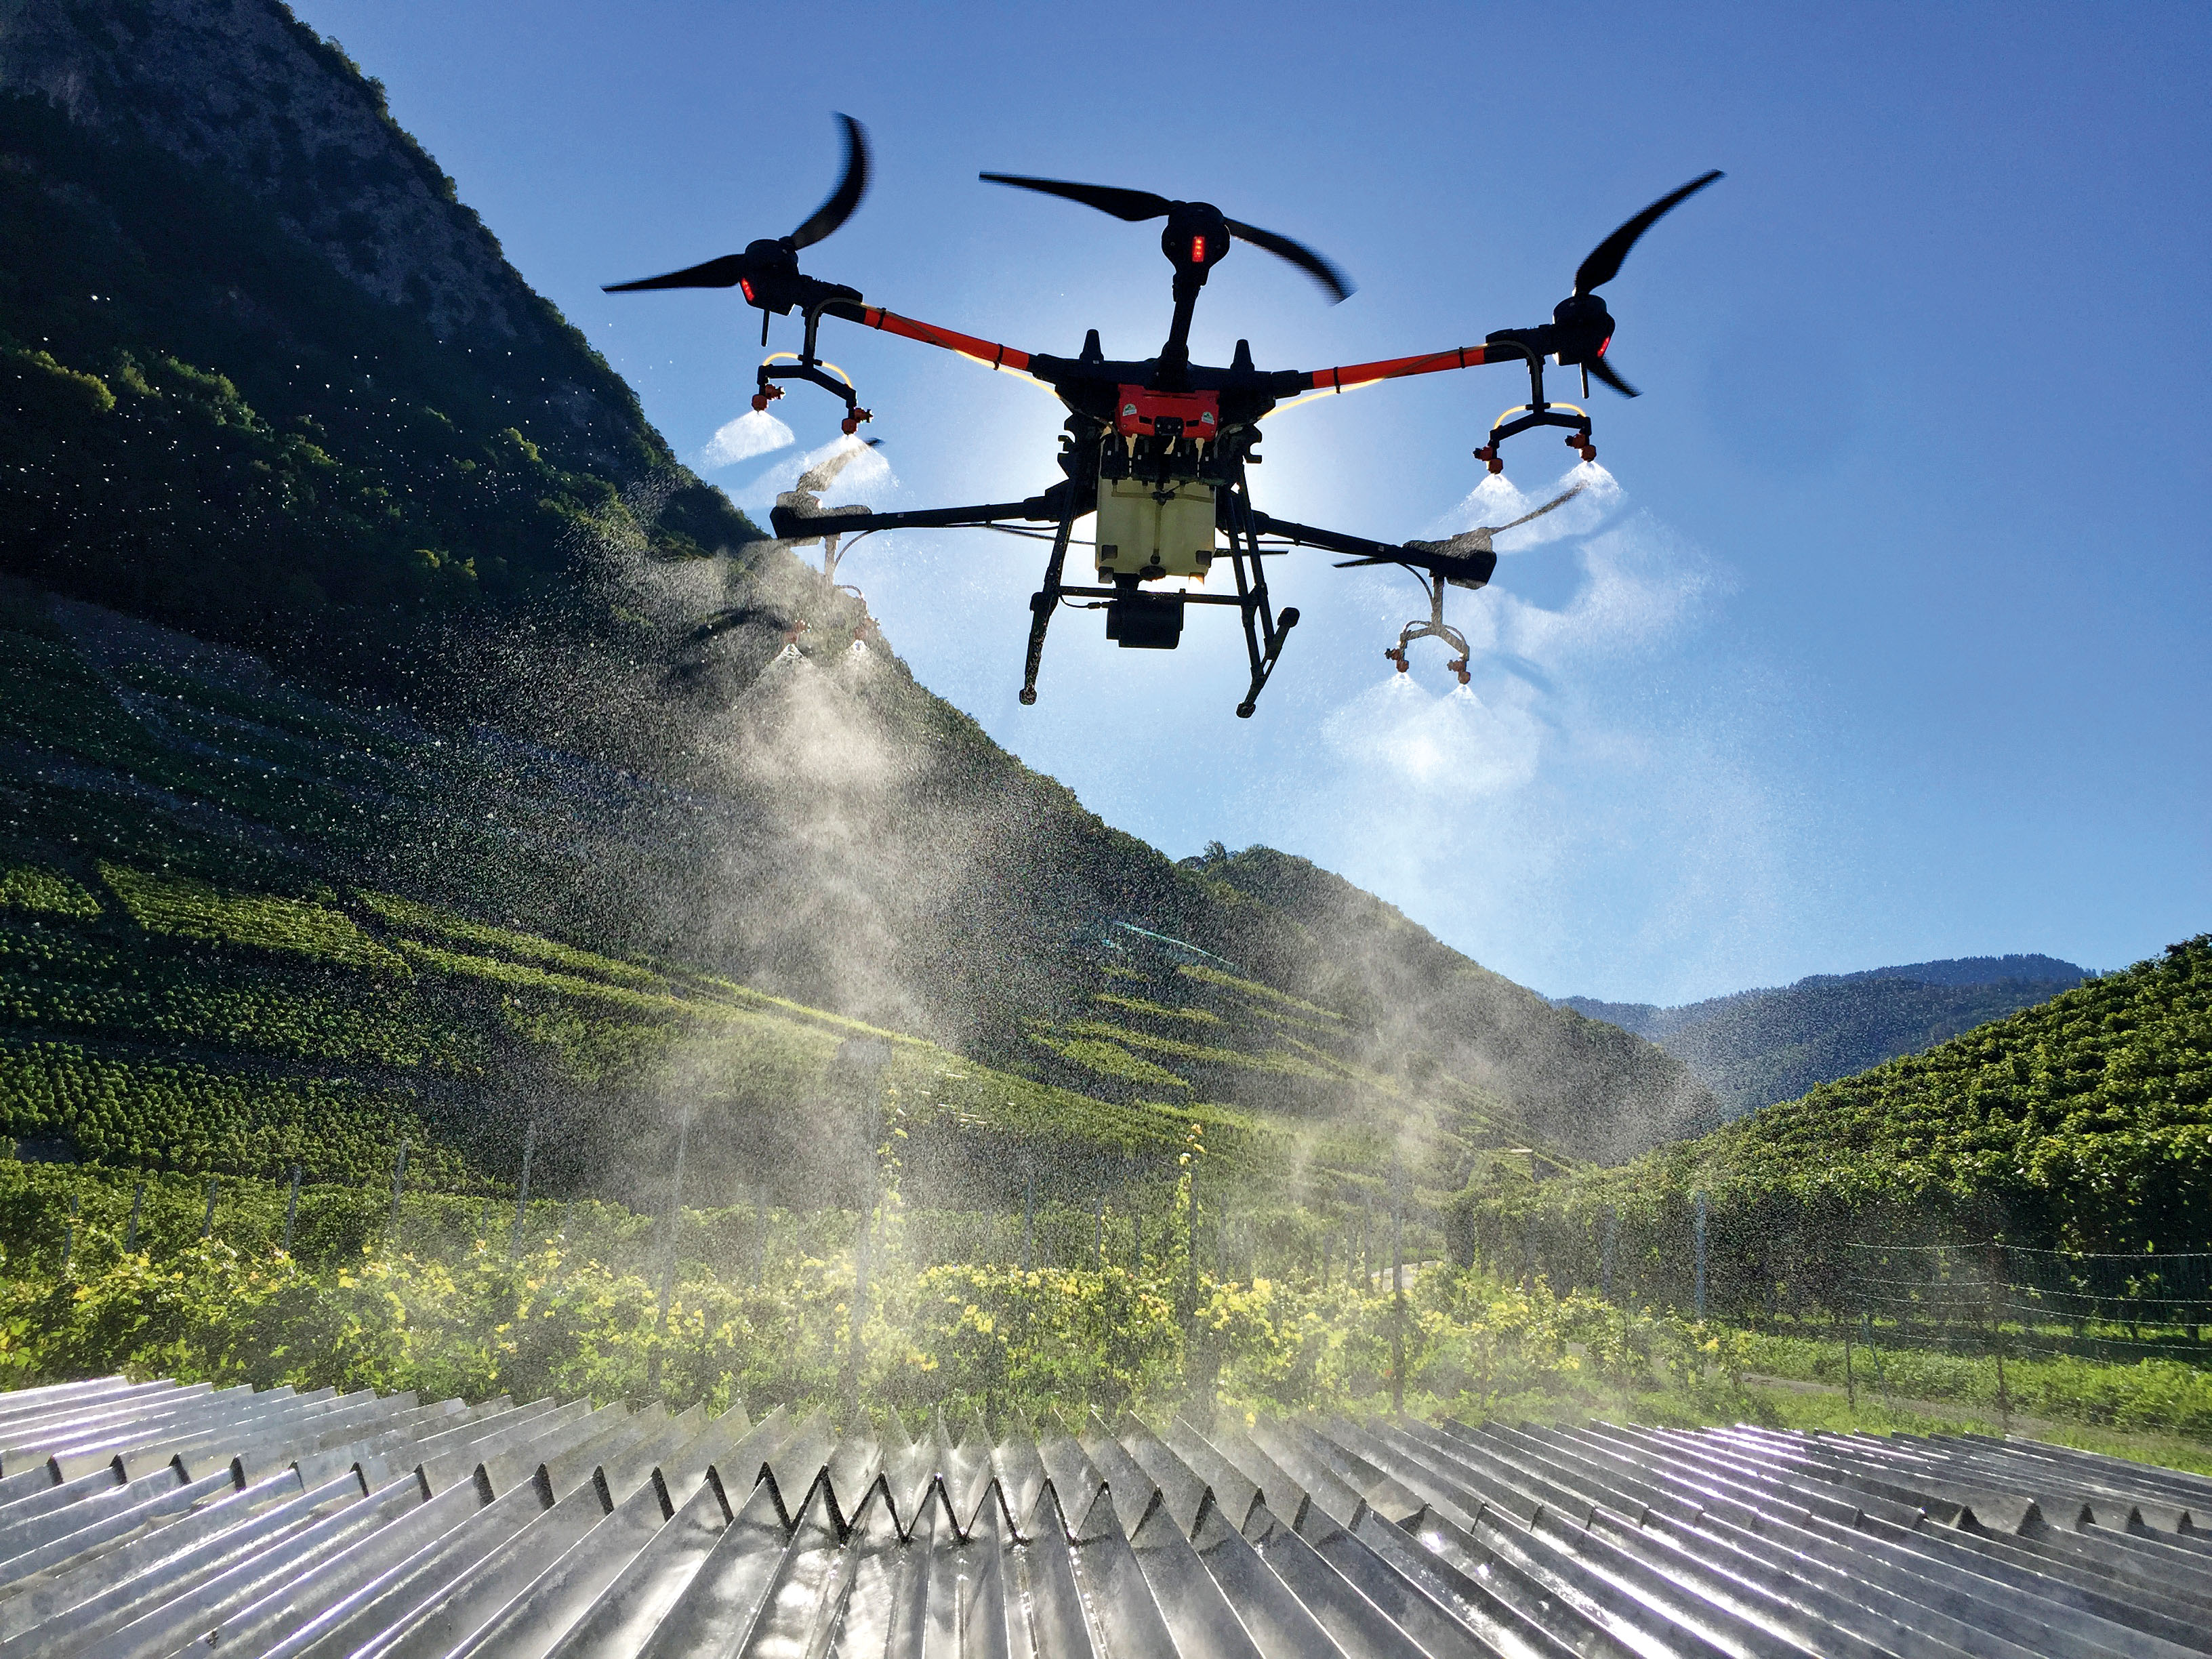 Evaluation of the performance of UAVs for the phytosanitary treatments of grapevines